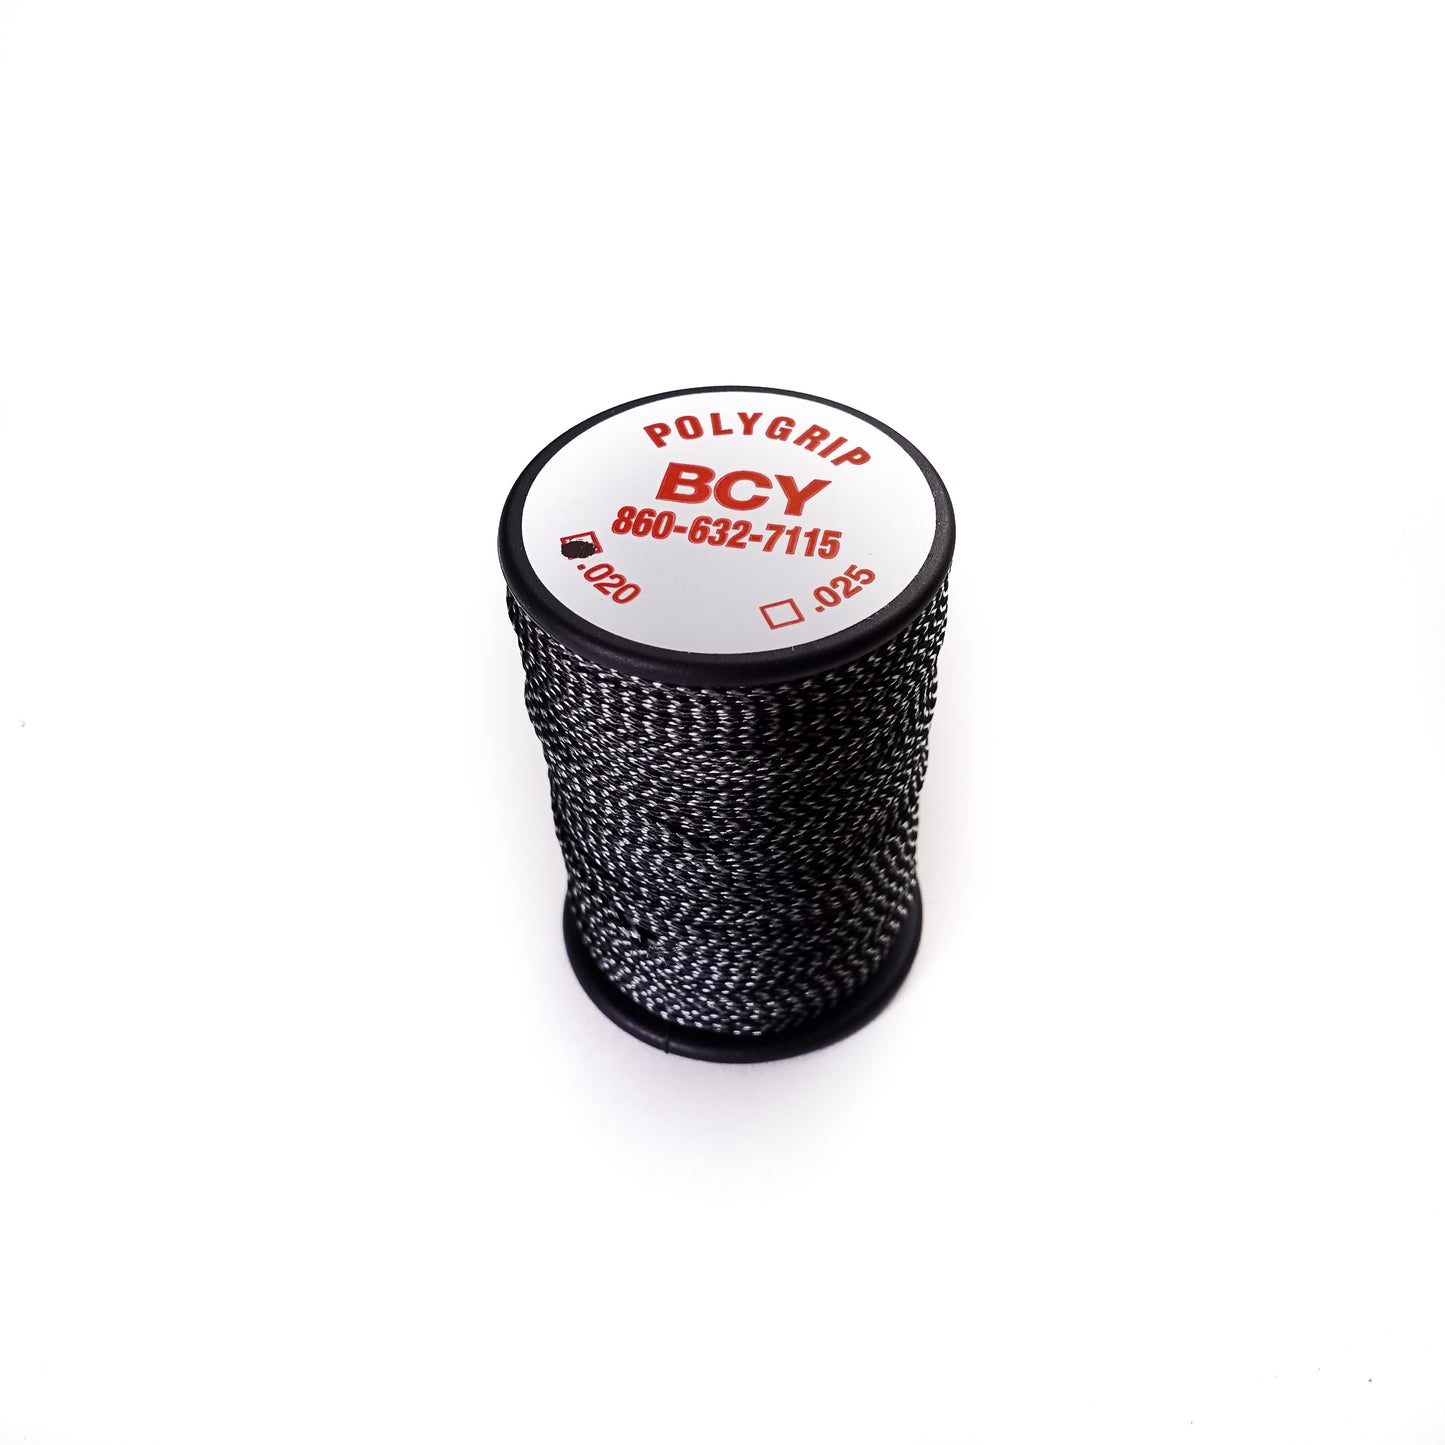 Polygrip Bow String Serving Material .025